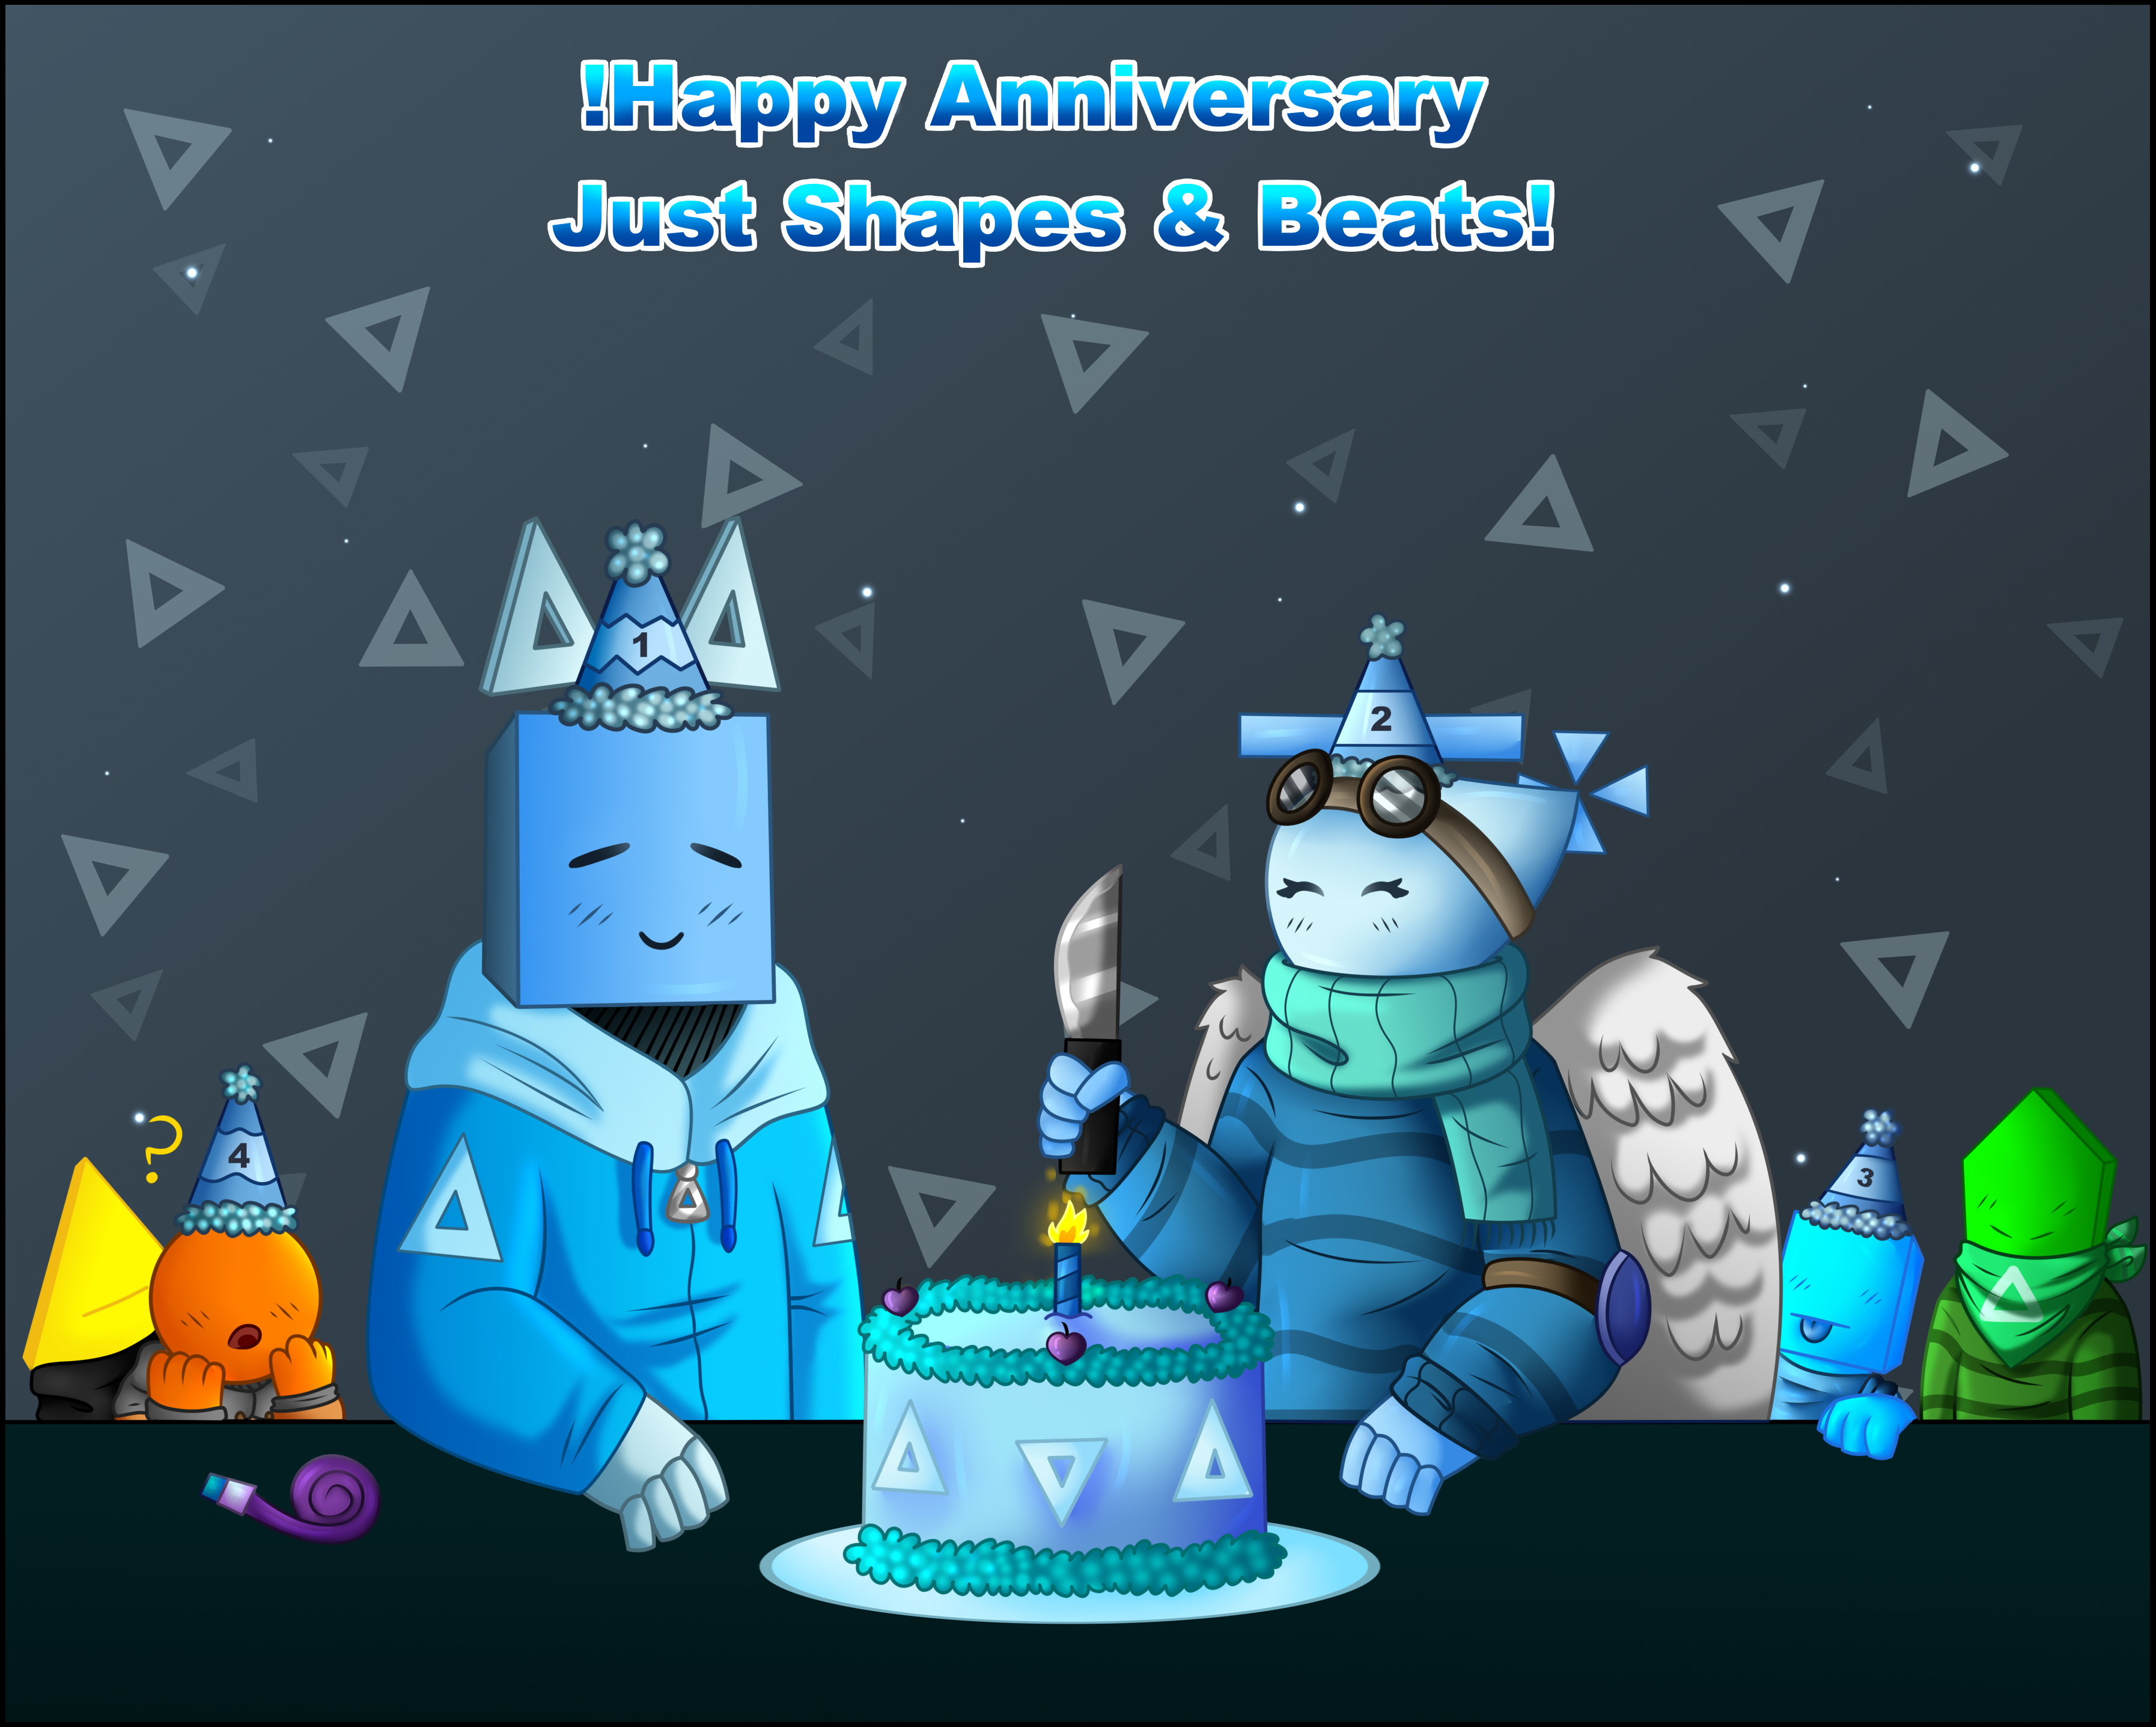 Just Shapes and Beats 2nd Anniversary by DragonfireMagic on DeviantArt